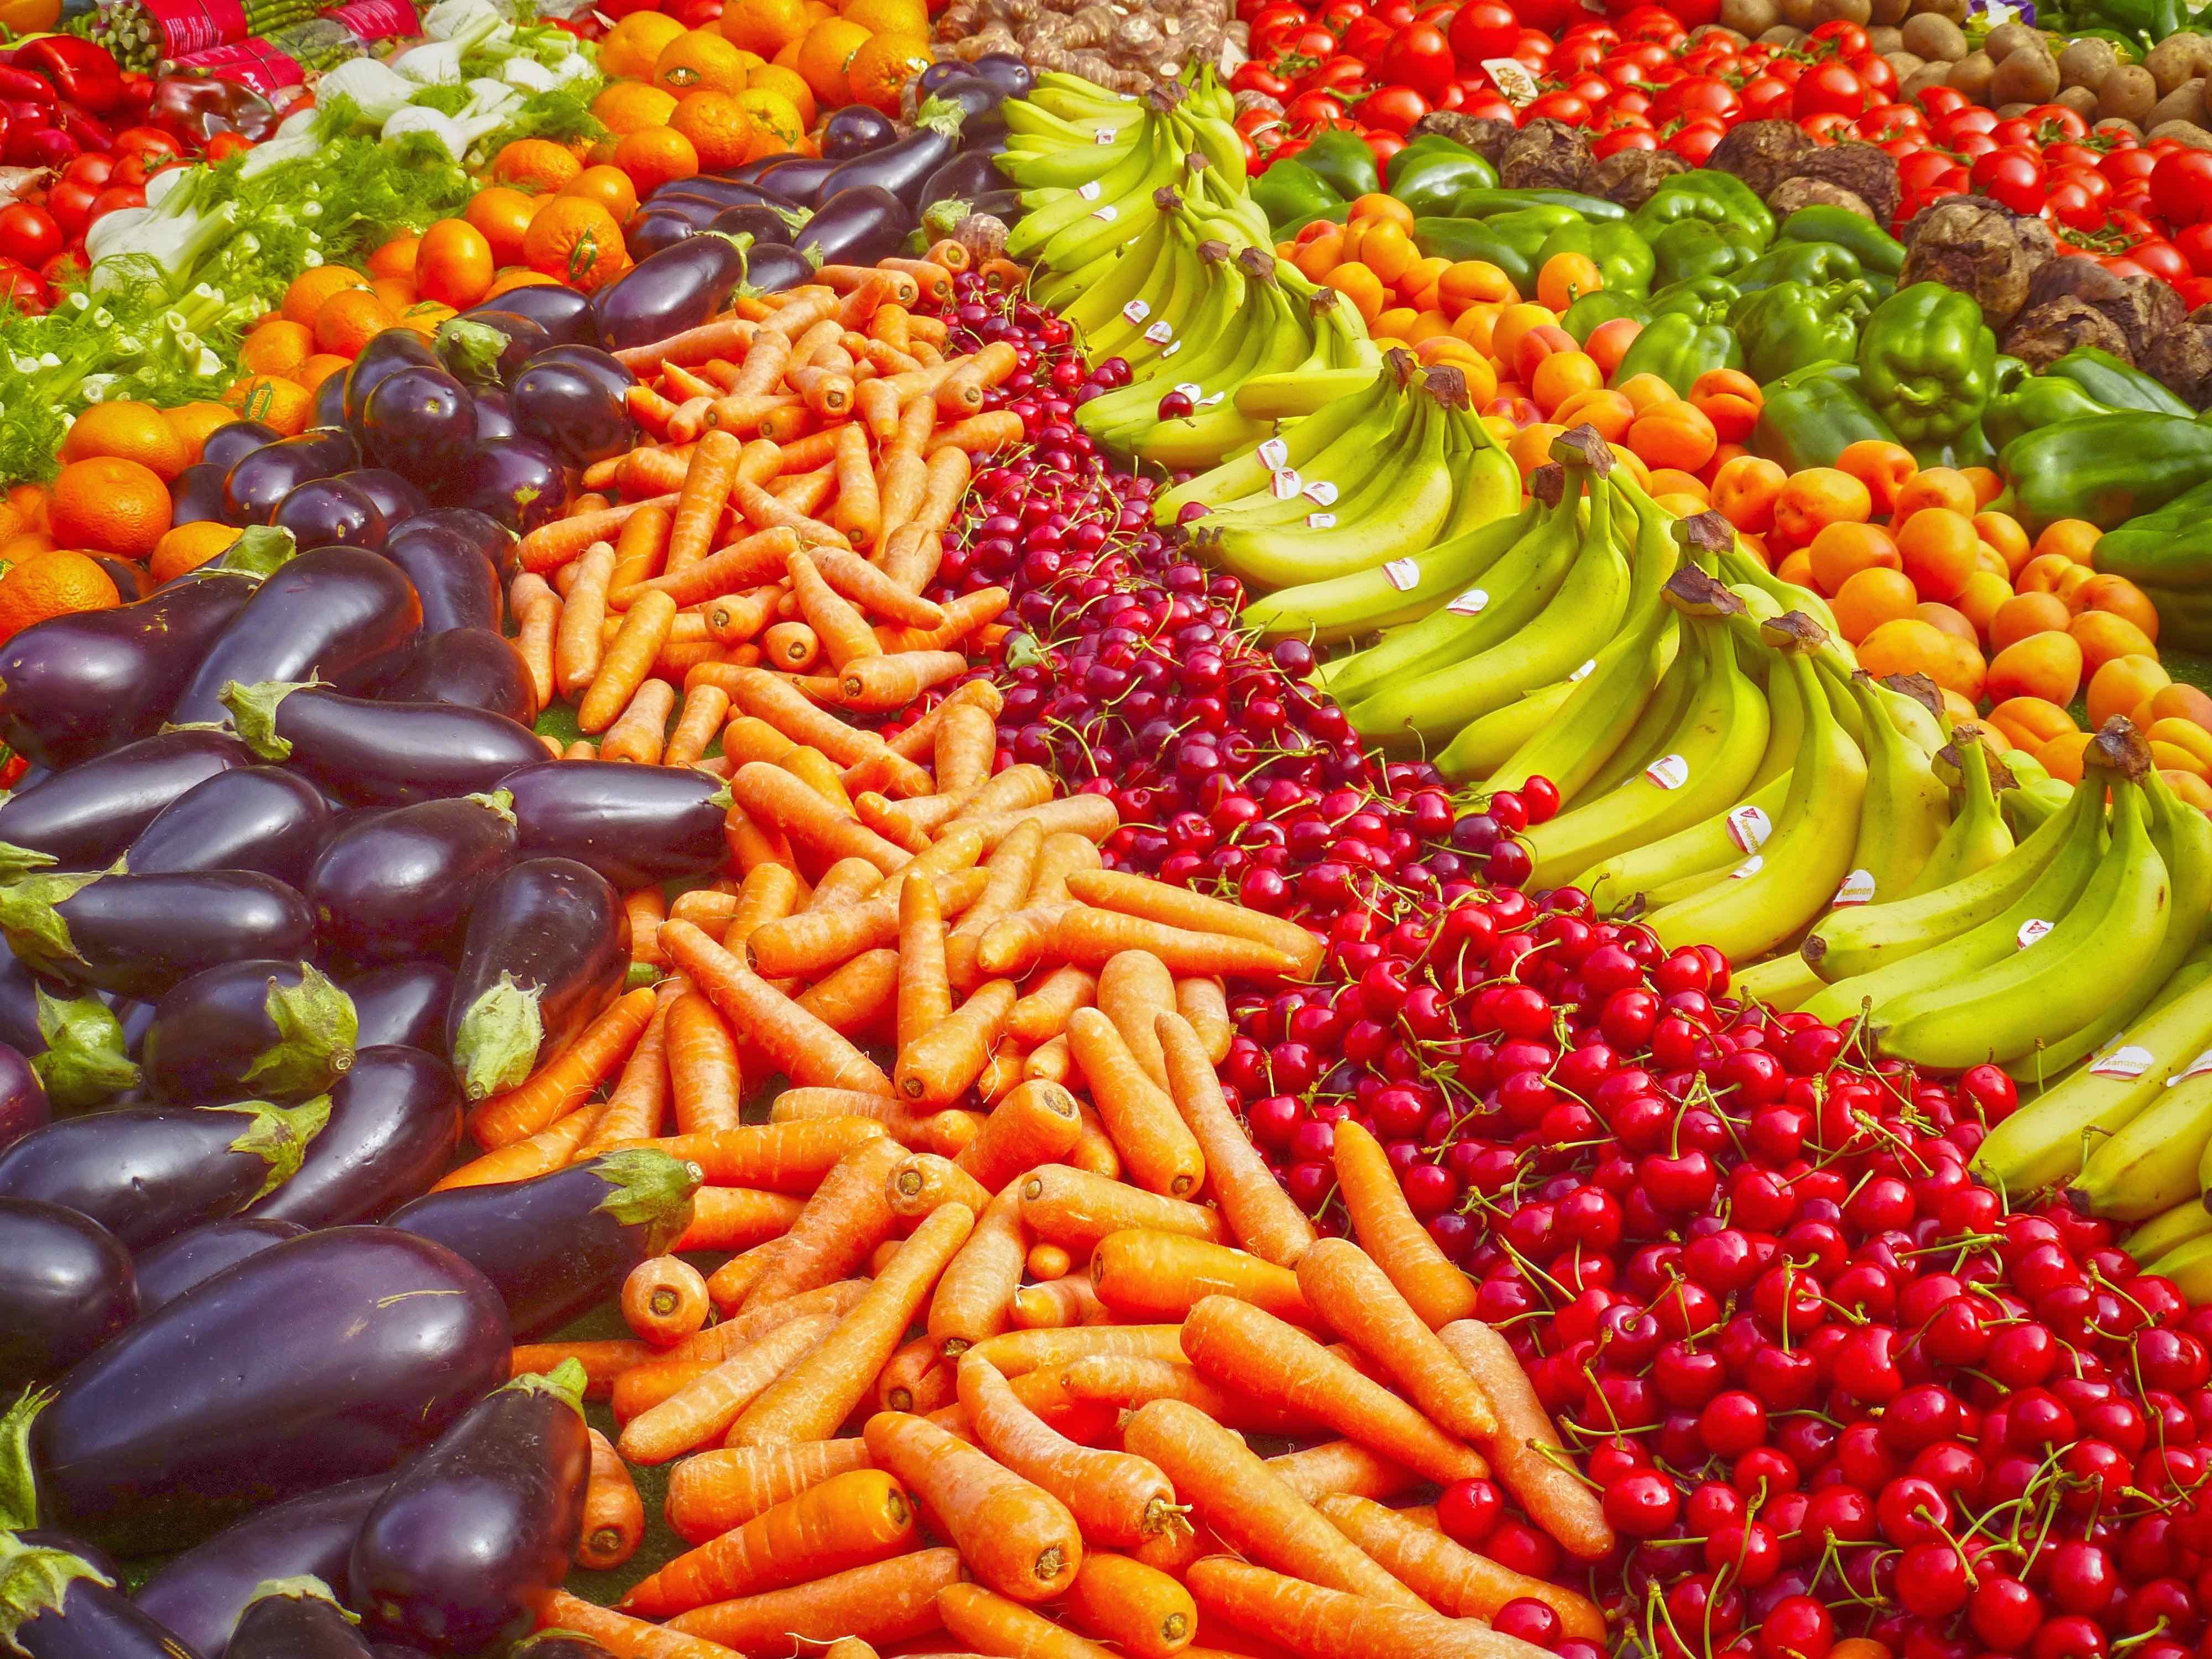 2021: the International Year of Fruits and Vegetables